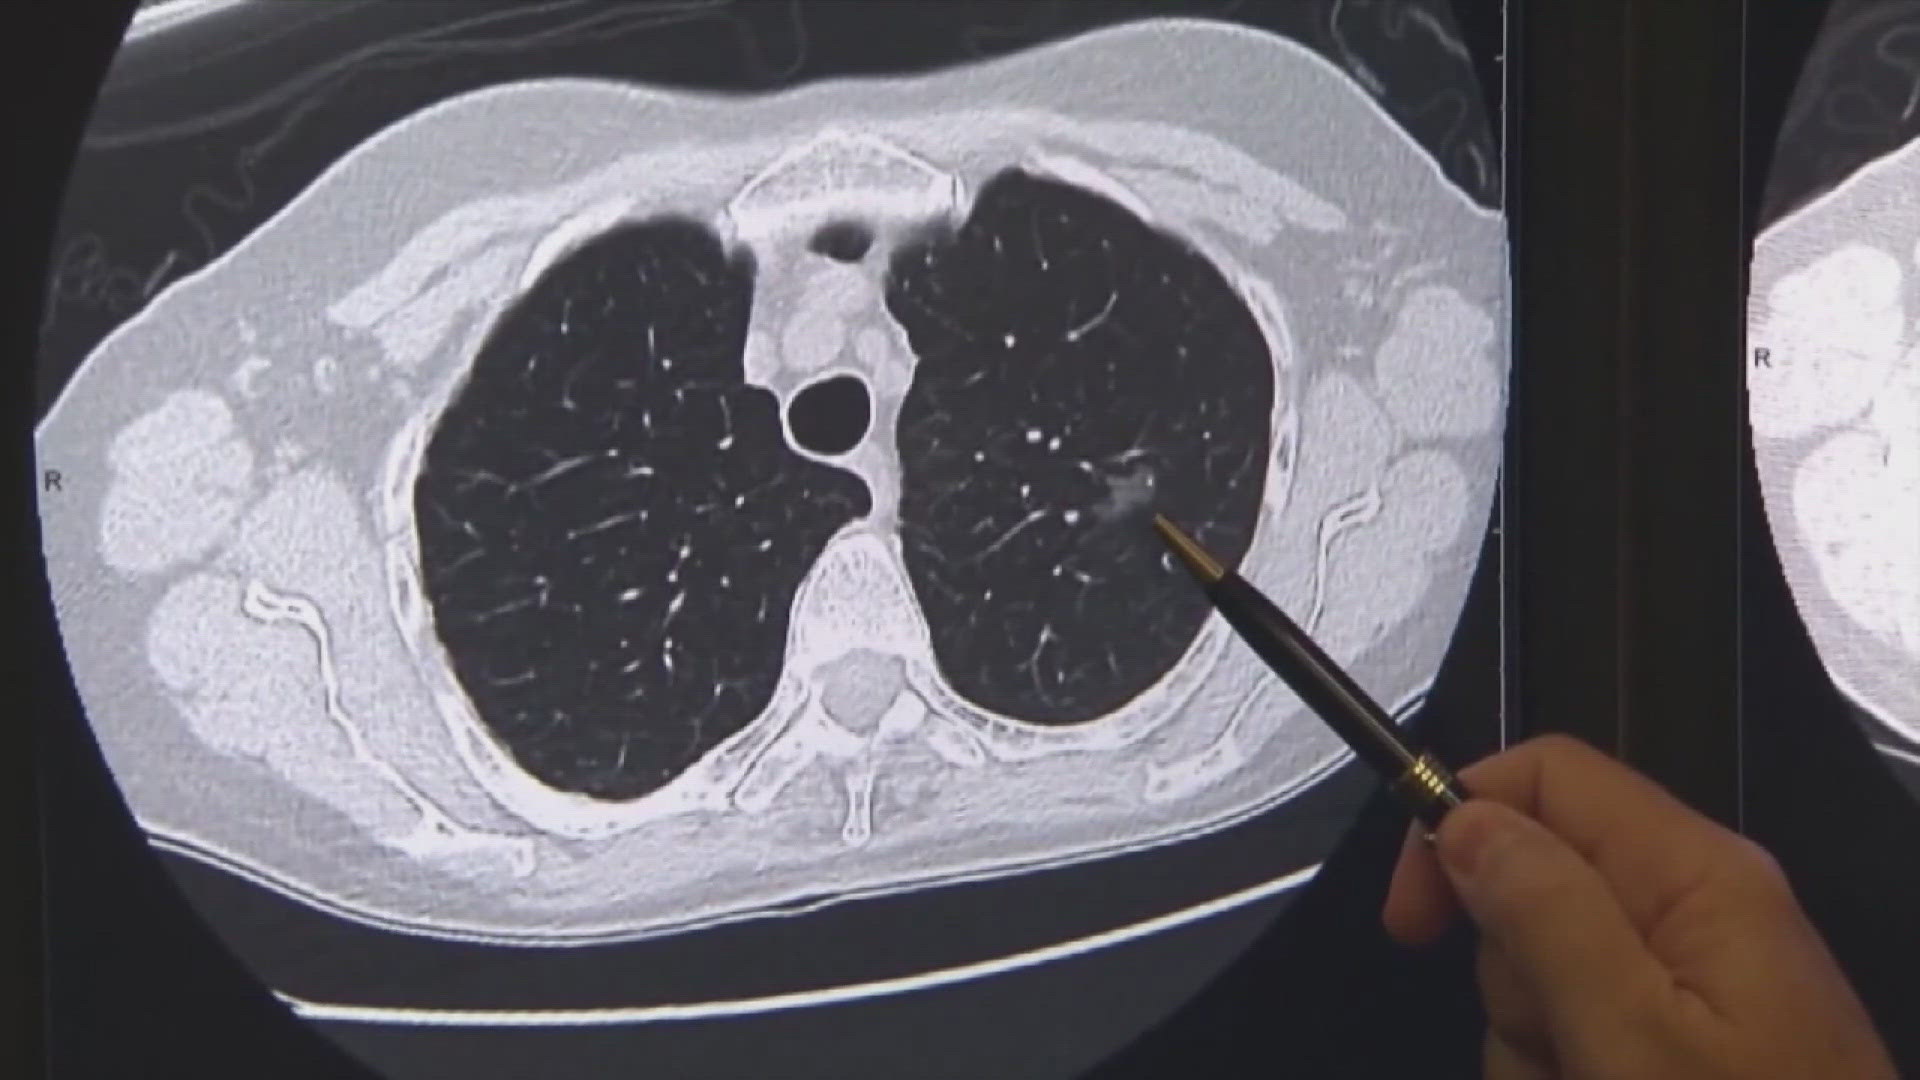 Dr. Sean Jordan, a thoracic surgeon at the University of Tennessee Medical Center, said the medication helps save the healthy part of the lung.